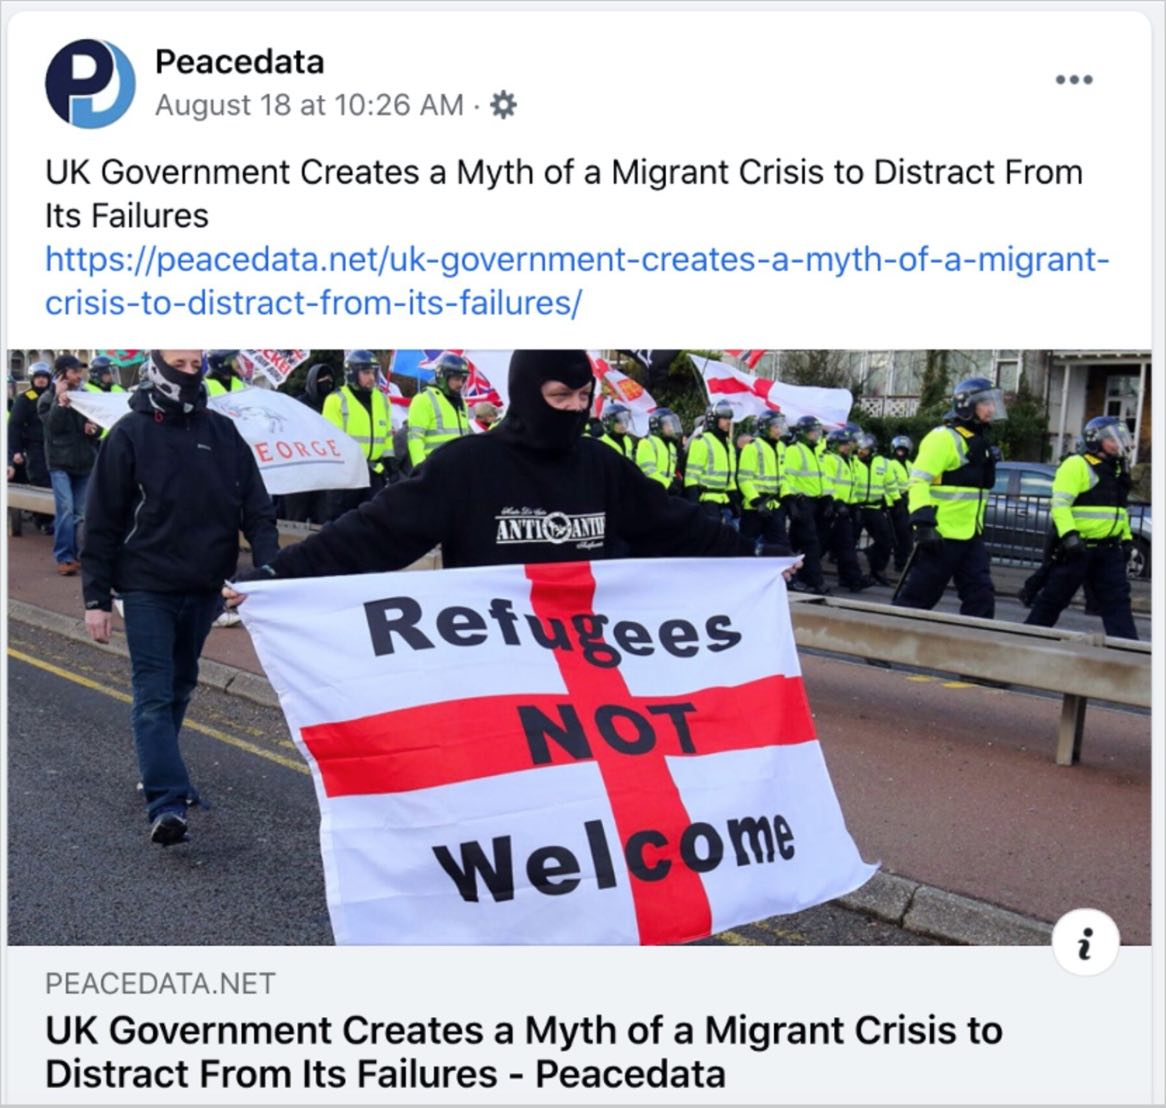 A screenshot of a Facebook post made by the fake news website, Peacedata, which is run by Russian operative. The title of the fake news story reads "UK Government Creates a Myth of a Migrant Crisis to Distract From its Failures, with a picture showing a protestor who is carrying a flag that says "Refugees Not Welcome"